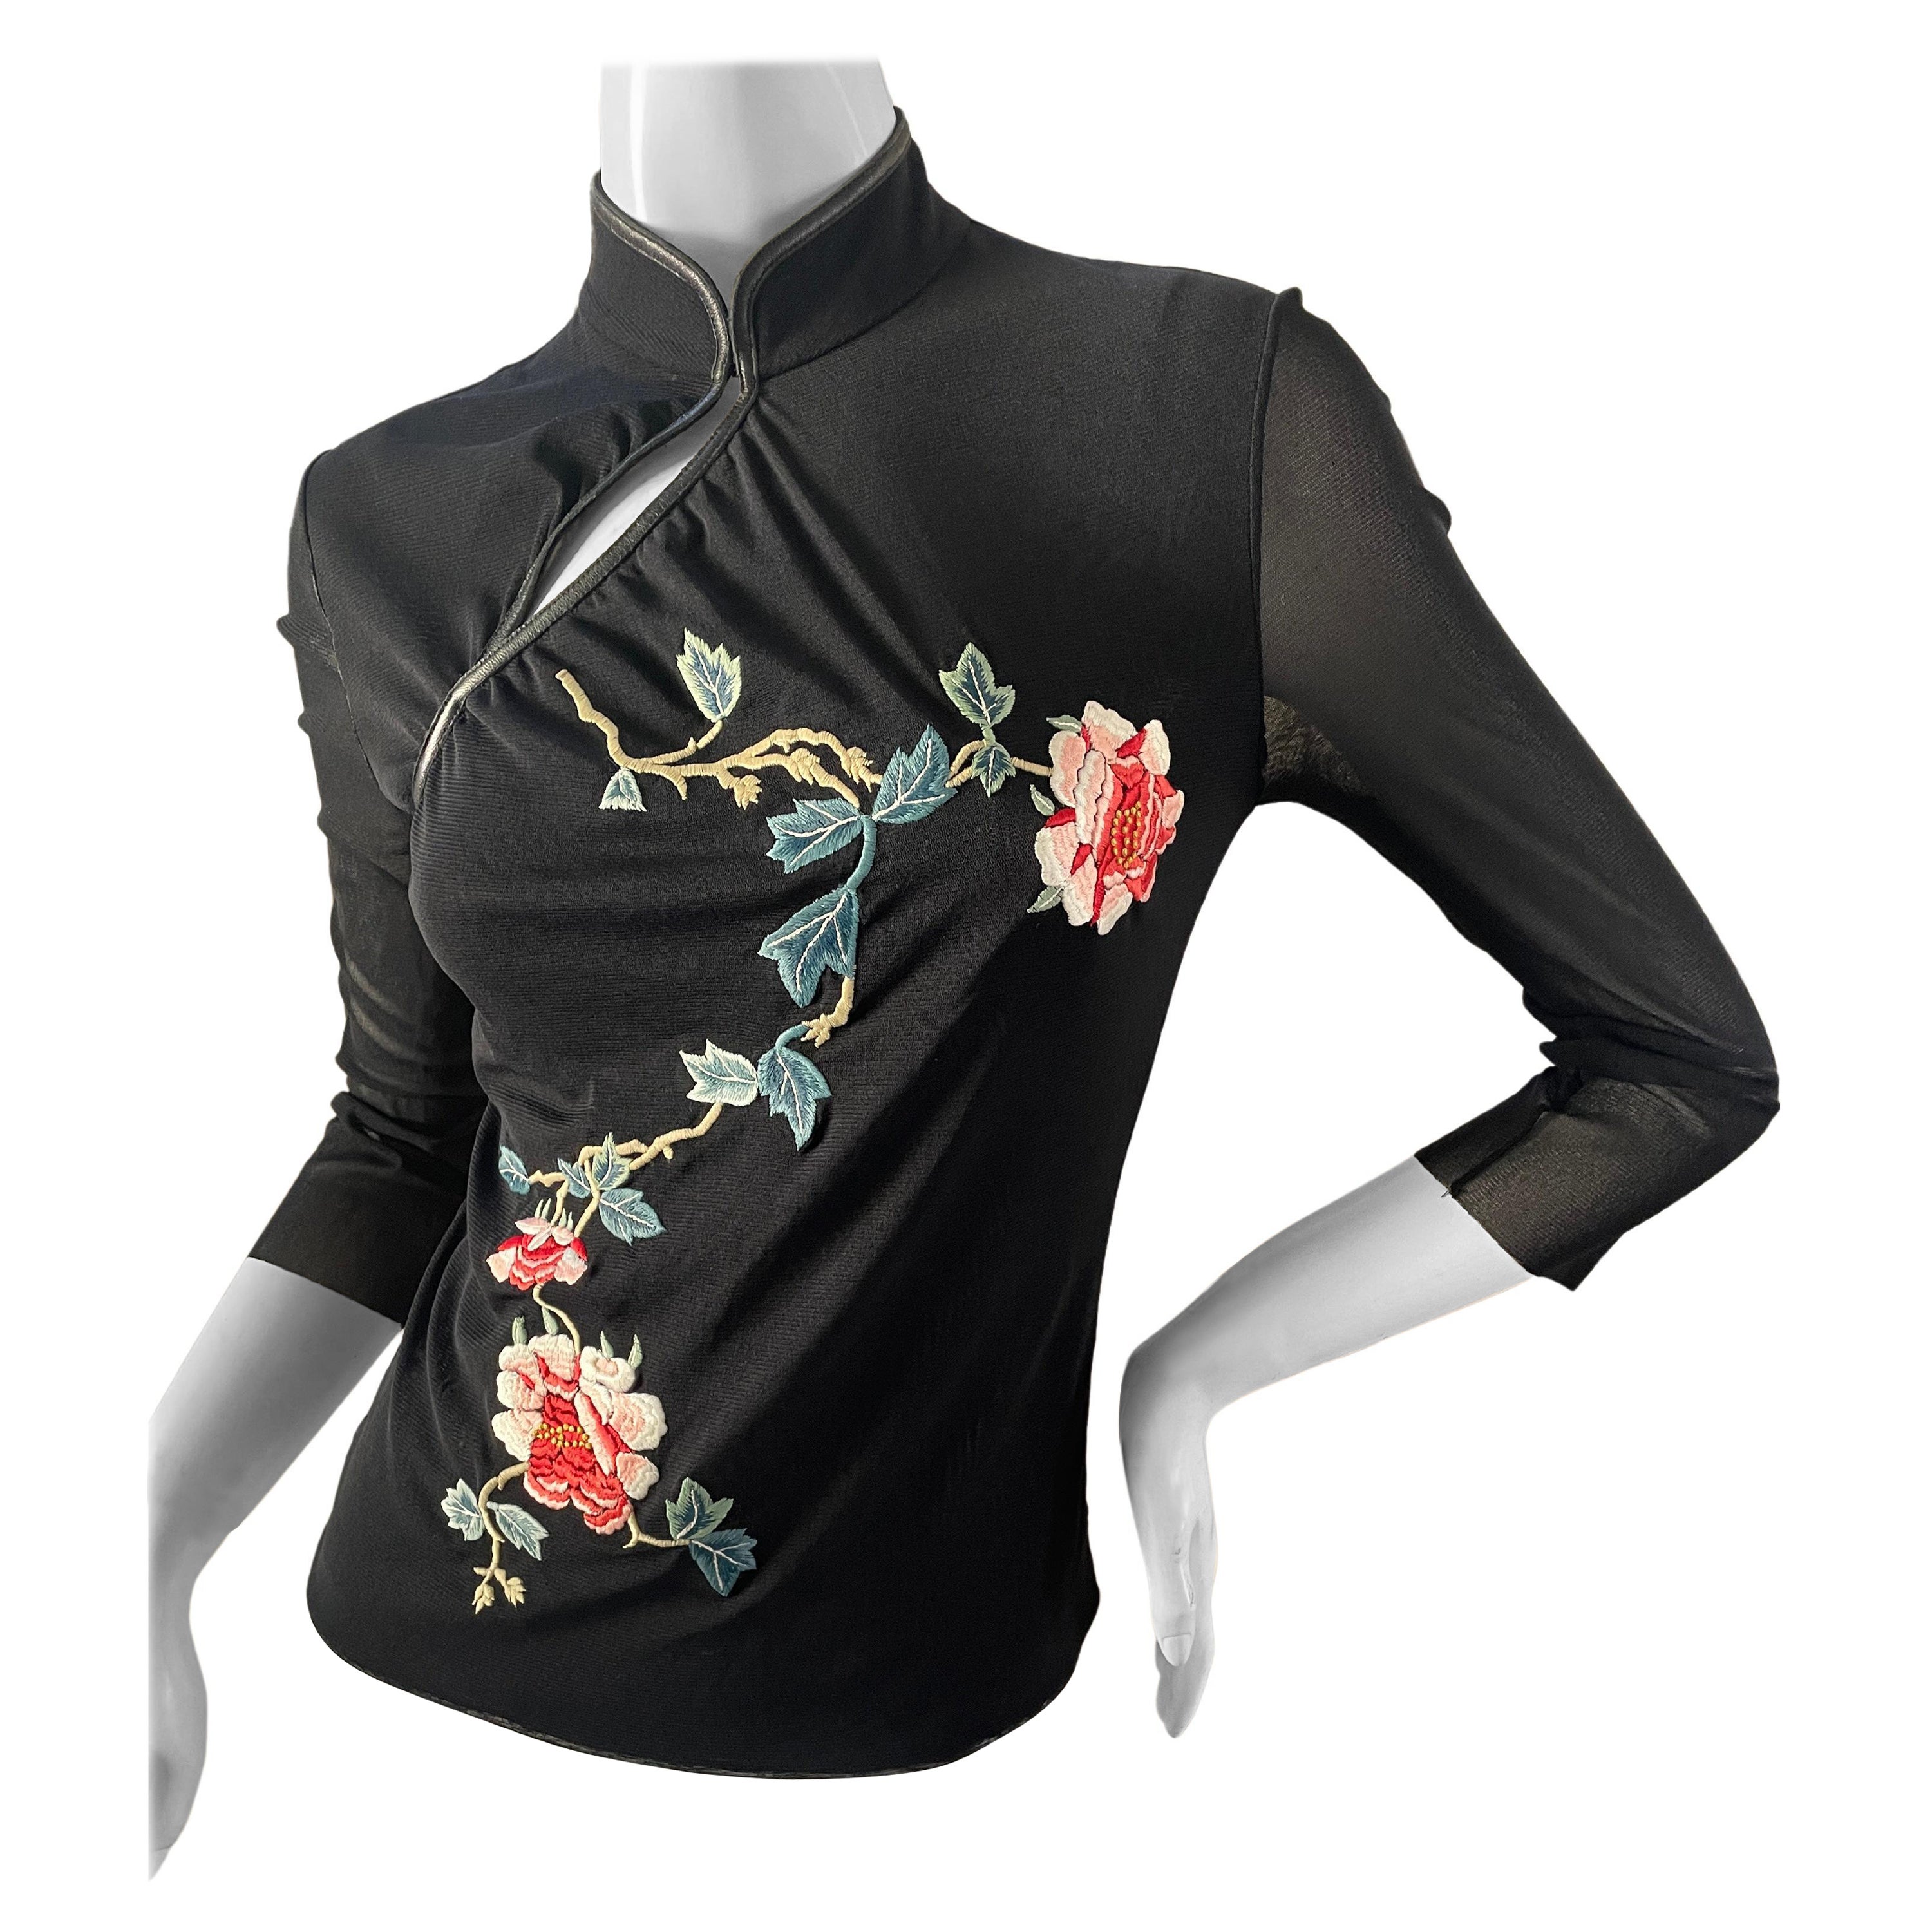 Vivienne Tam Vintage Cheongsam Style Black Top with Embroidered Flowers For Sale